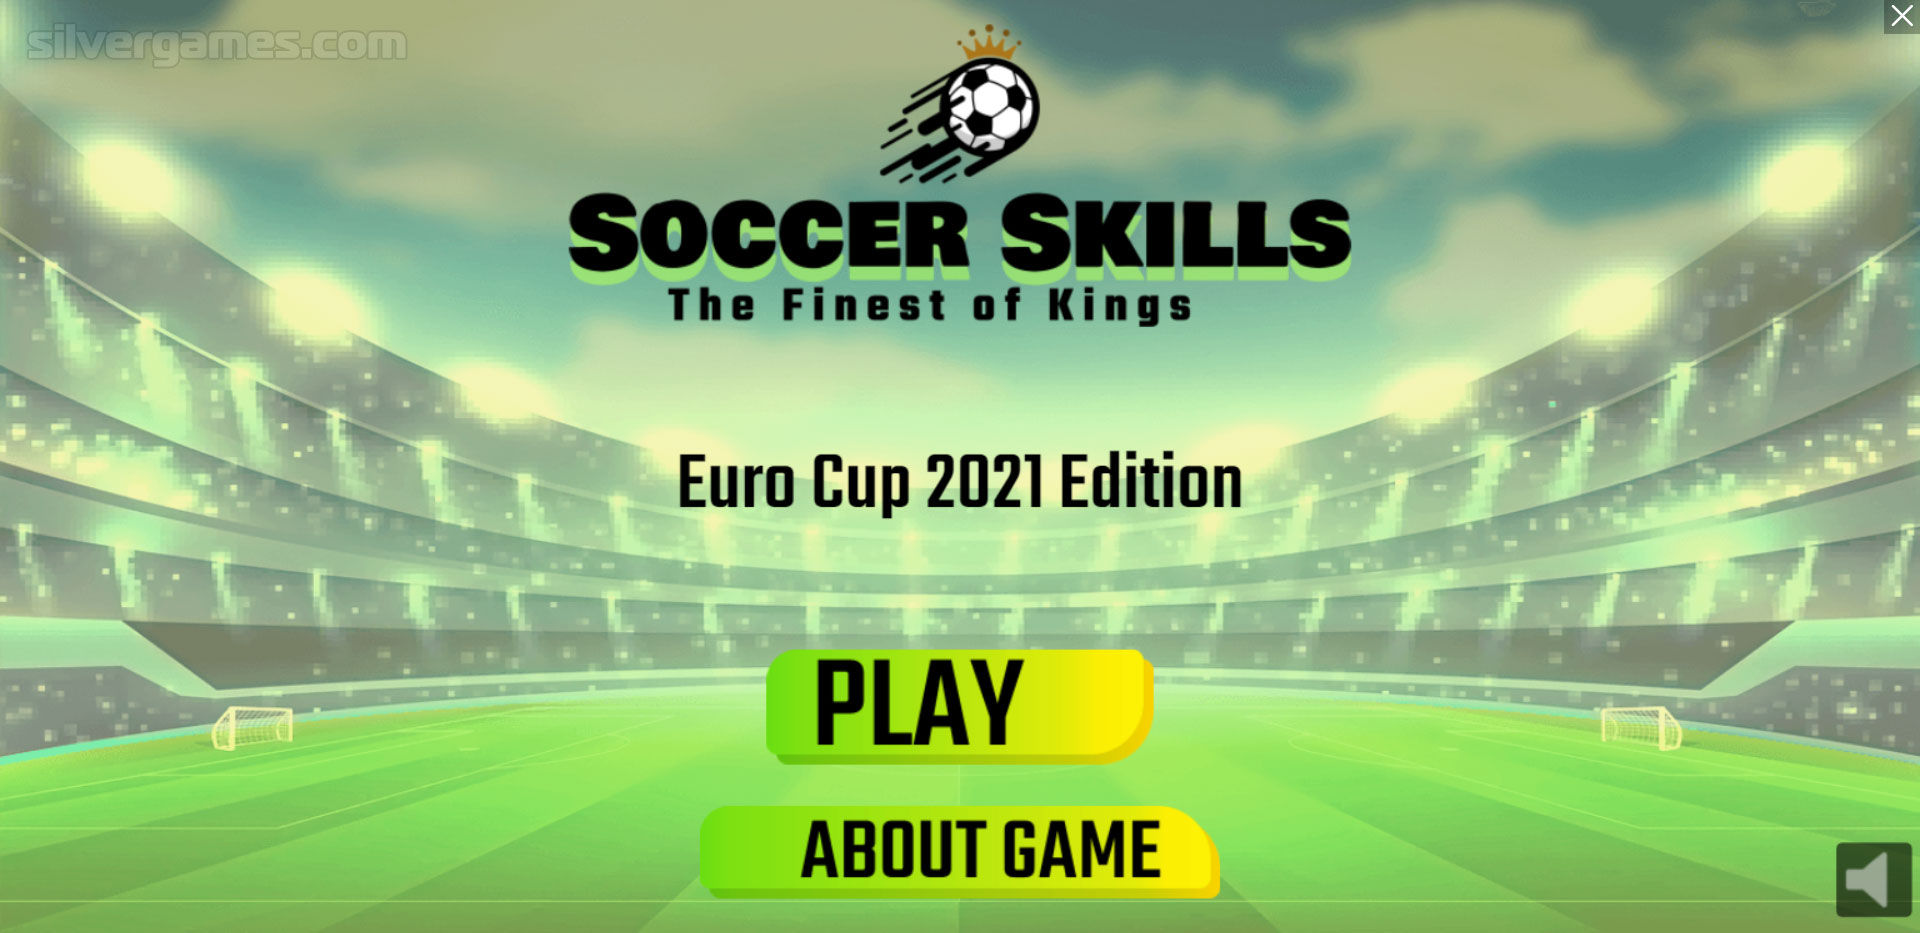 SOCCER SKILLS WORLD CUP - Play Online for Free!